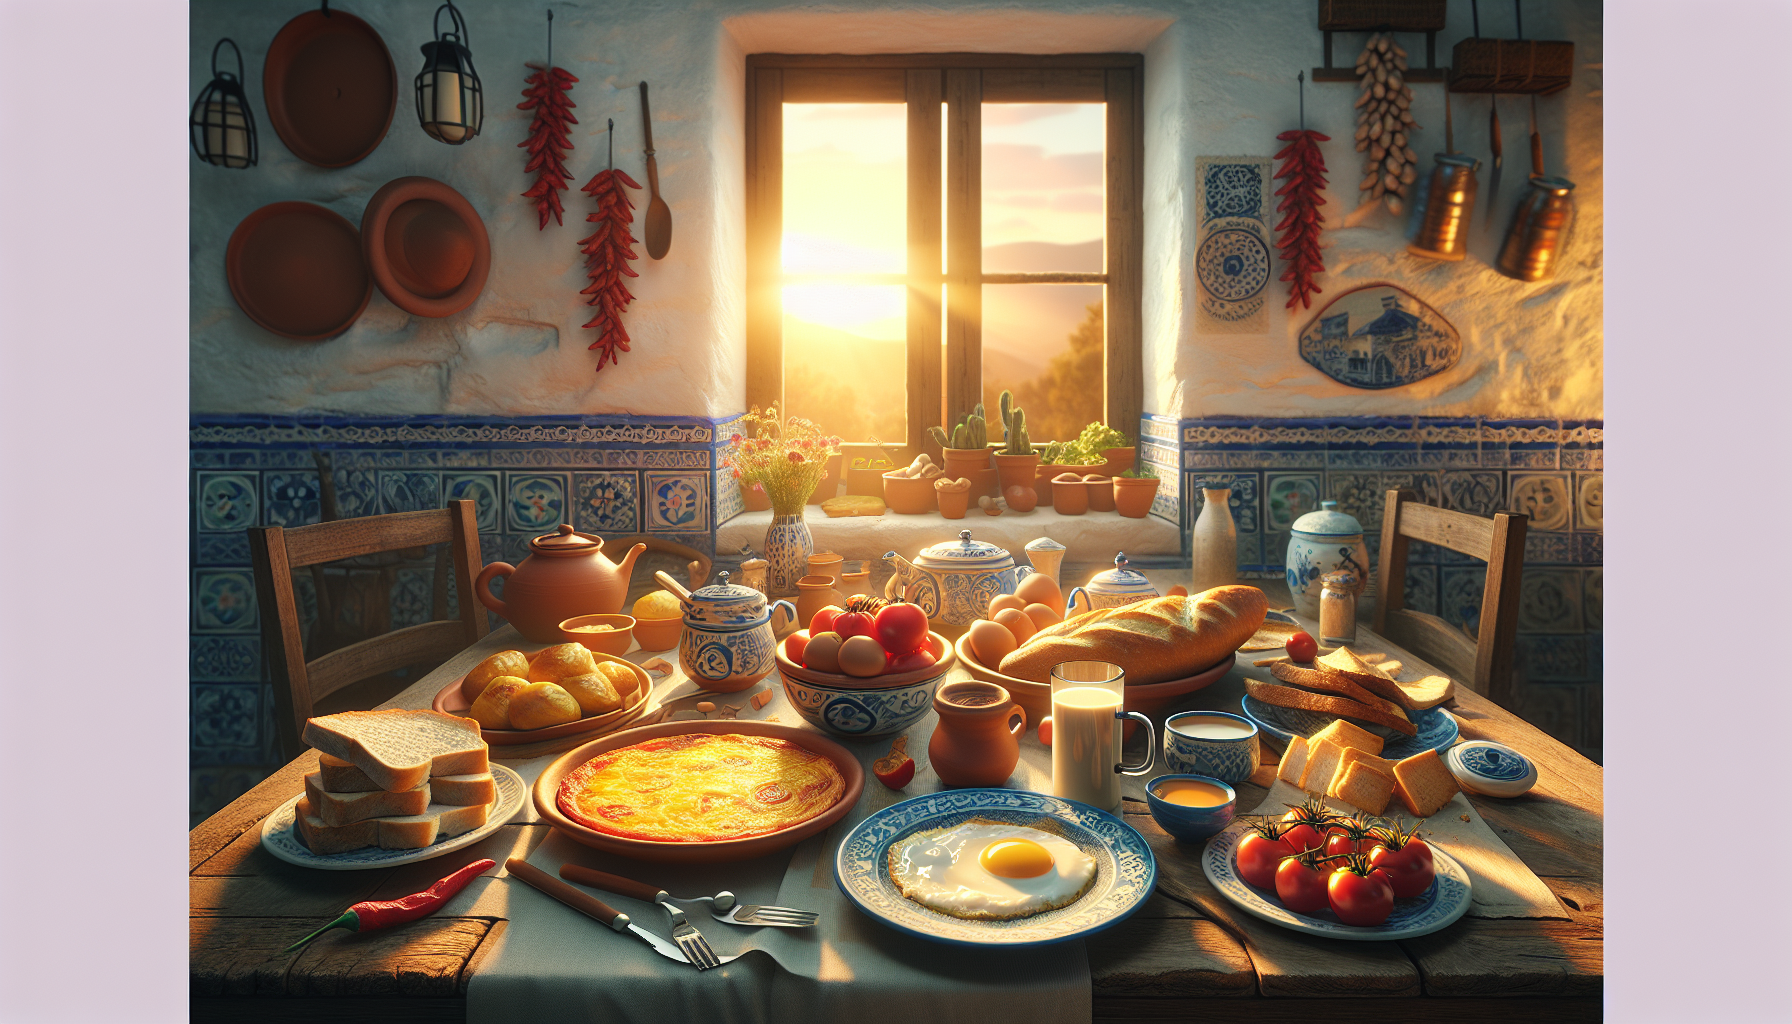 Can You Suggest A Light And Nutritious Spanish Breakfast Recipe?